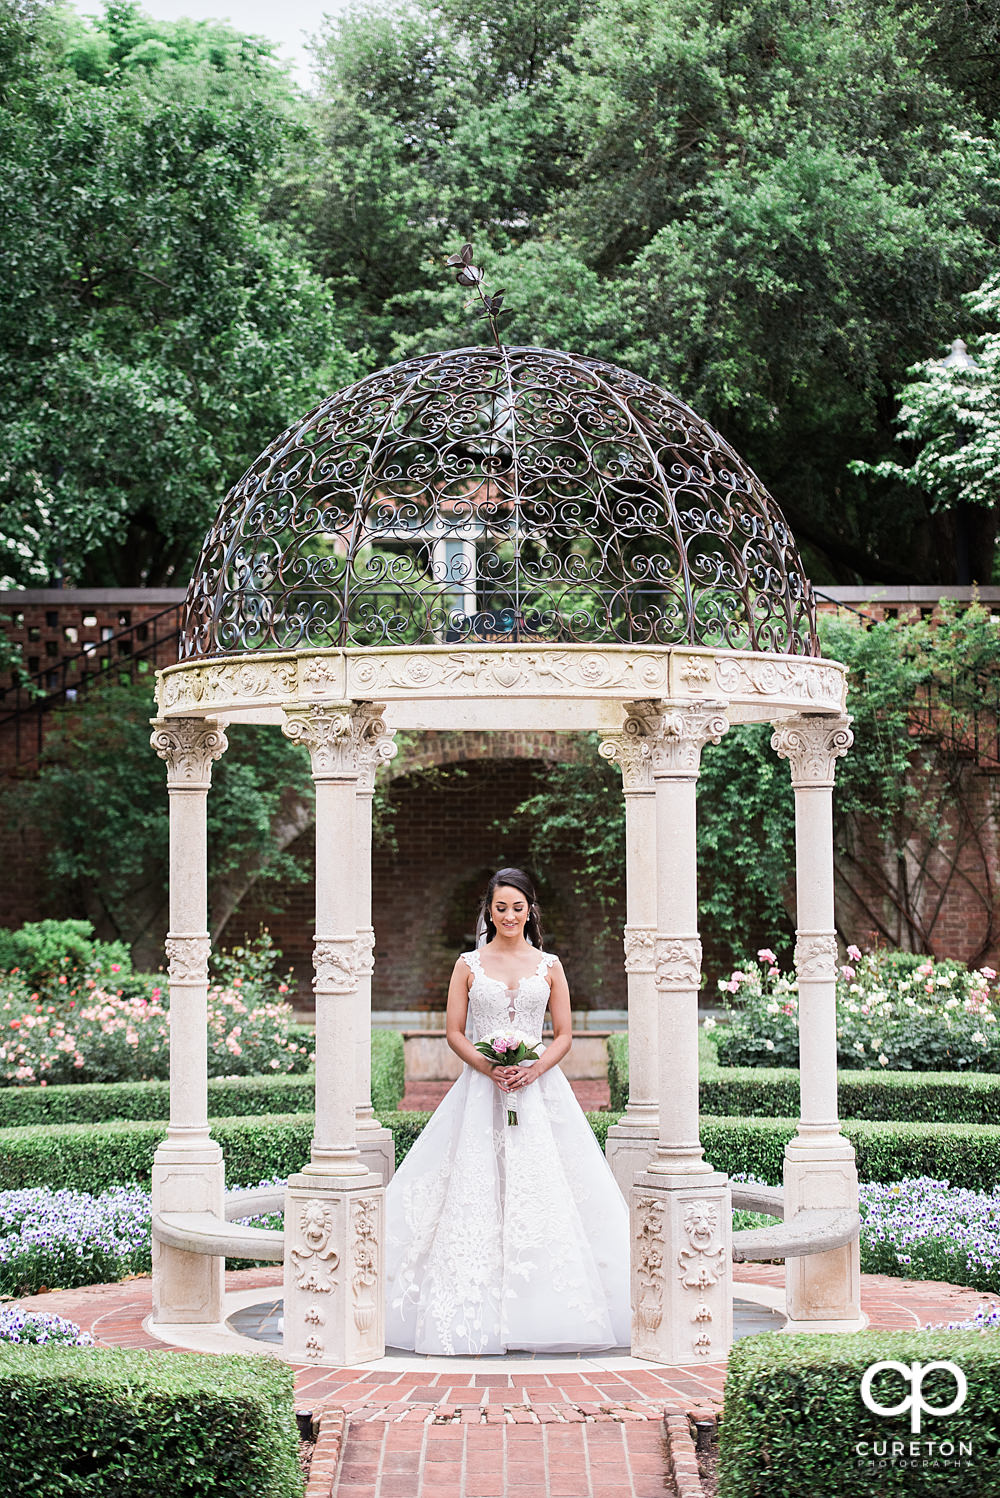 Morgan - Bridal Photography Session at the FTCC Rose Garden in